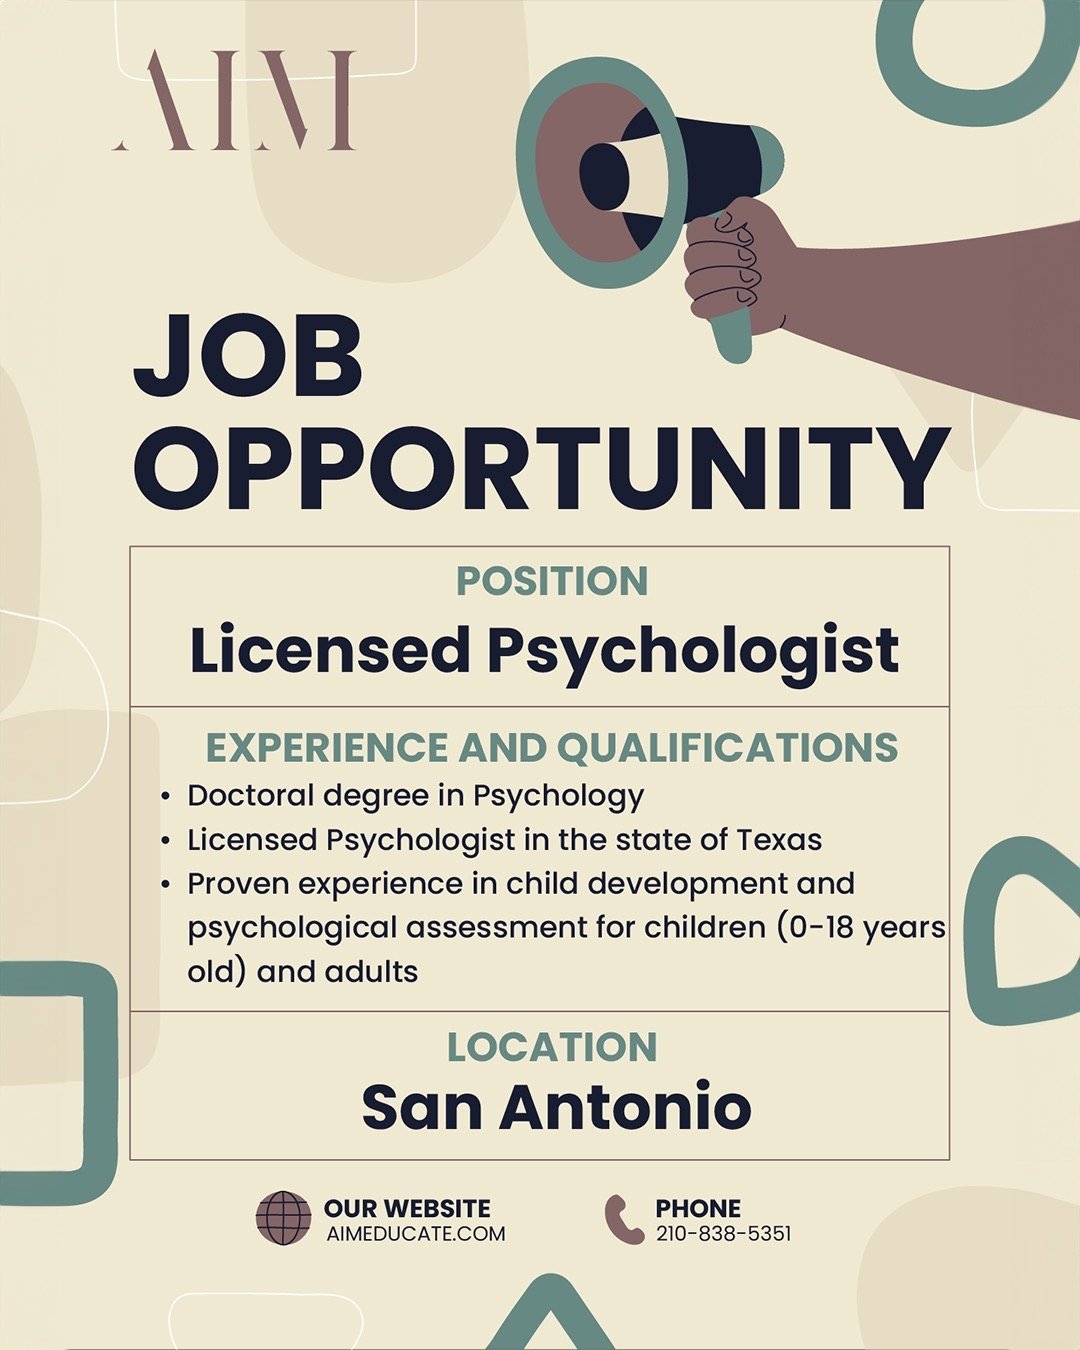 AIM is now hiring for a Licensed Psychologist in San Antonio! We're also hiring for Physical Therapy Assistants in Austin! Come take the leap of faith and join our AIM-azing team! #aim #aimeducate #schoolpsychologist #psychology #hiring #texas #speci